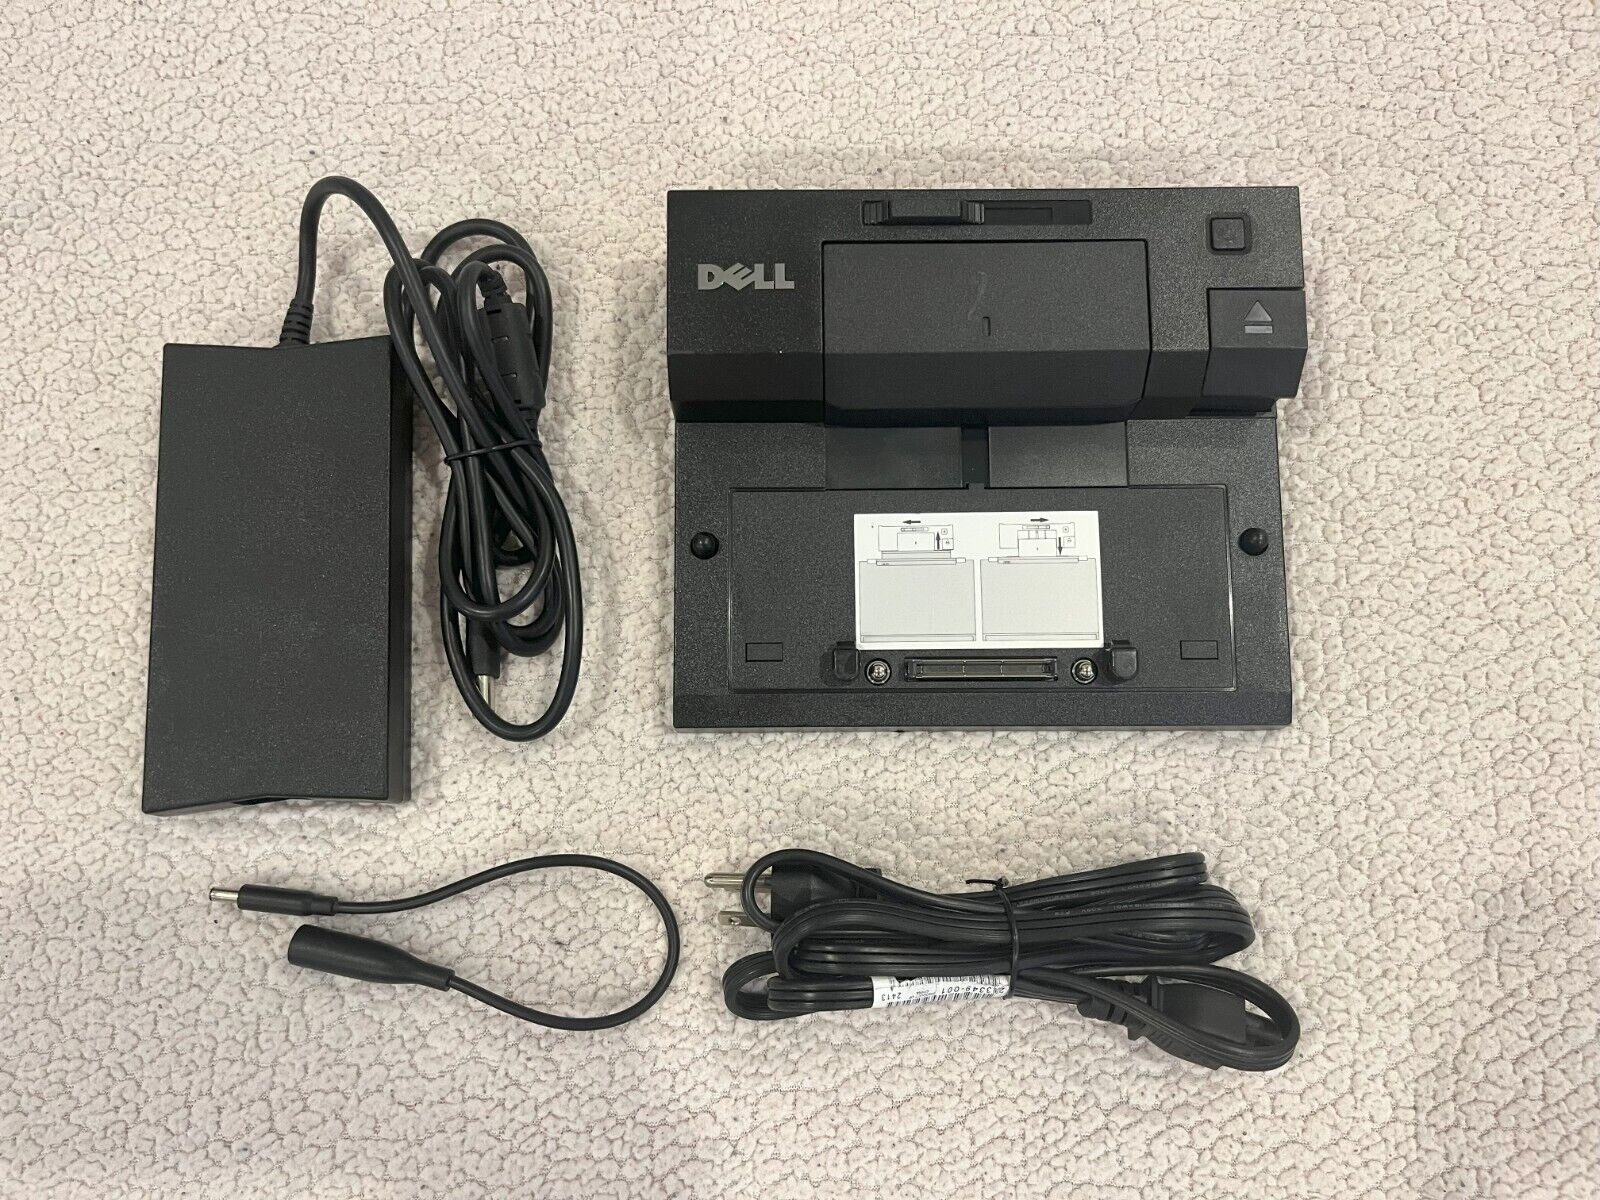 Dell PRO3X E-Port Replicator with USB 3.0 and 130W Power Adapter Docking Station